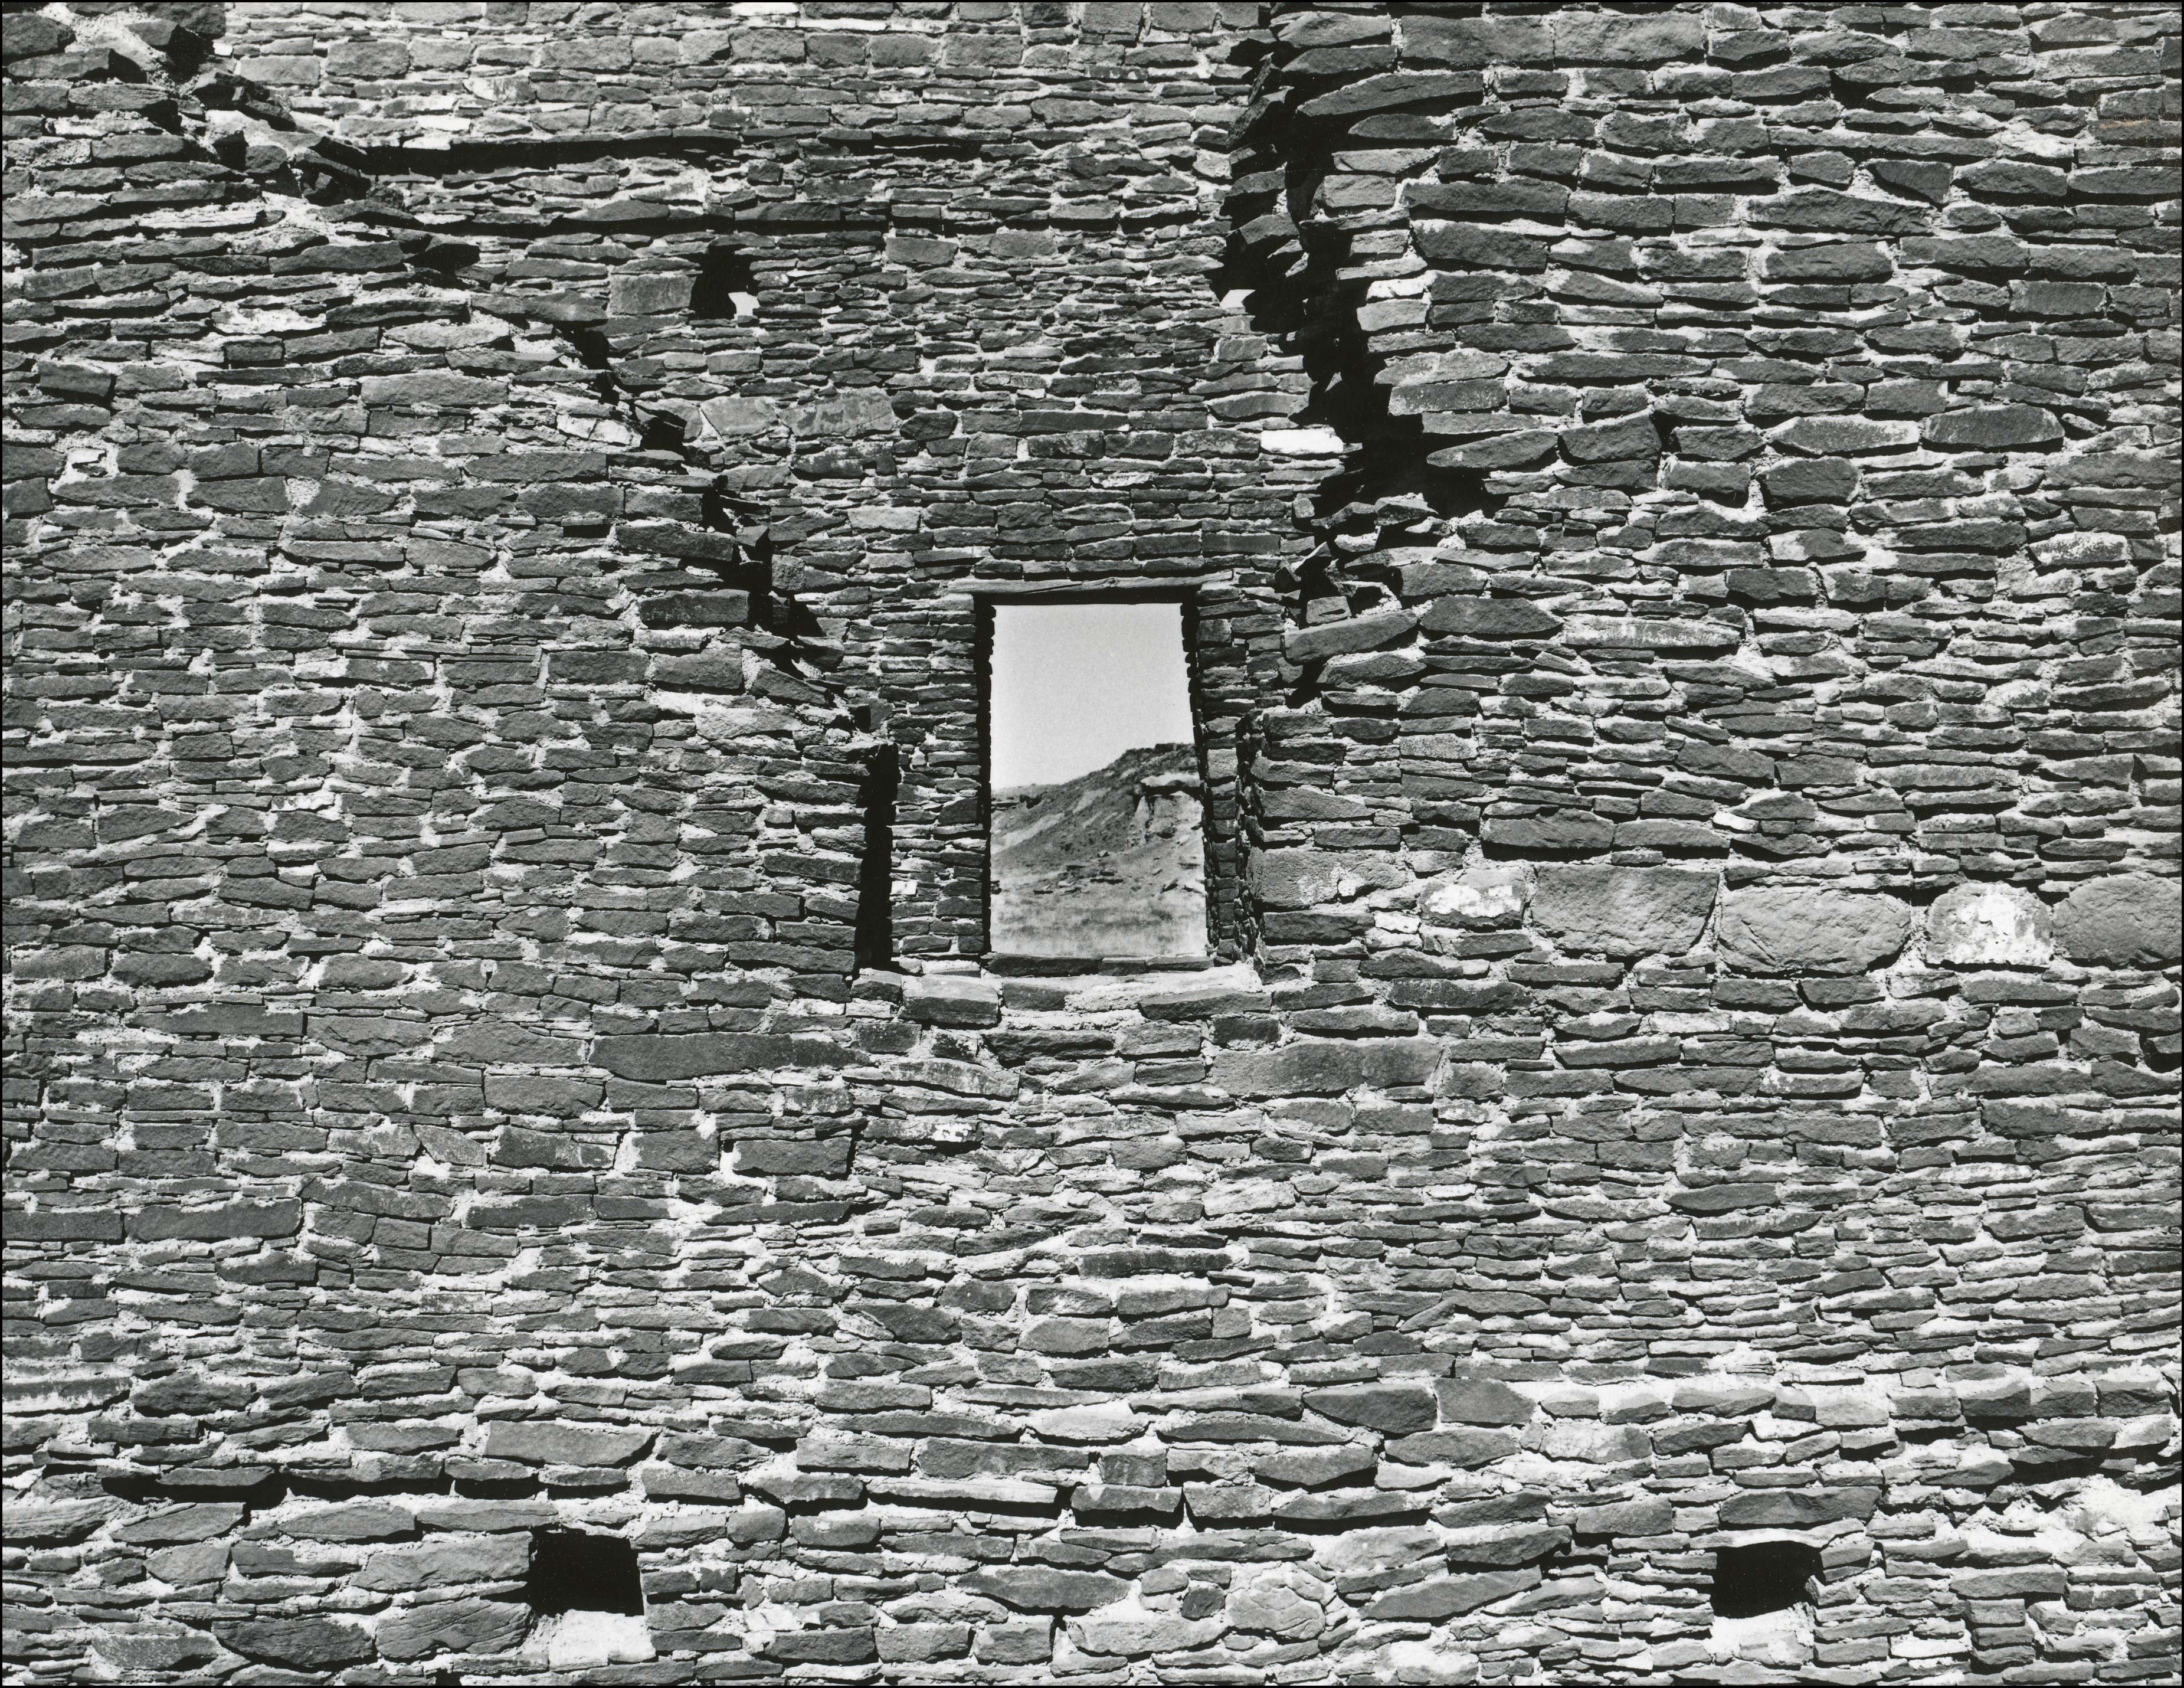 Looking through a small window in an old pueblo wall